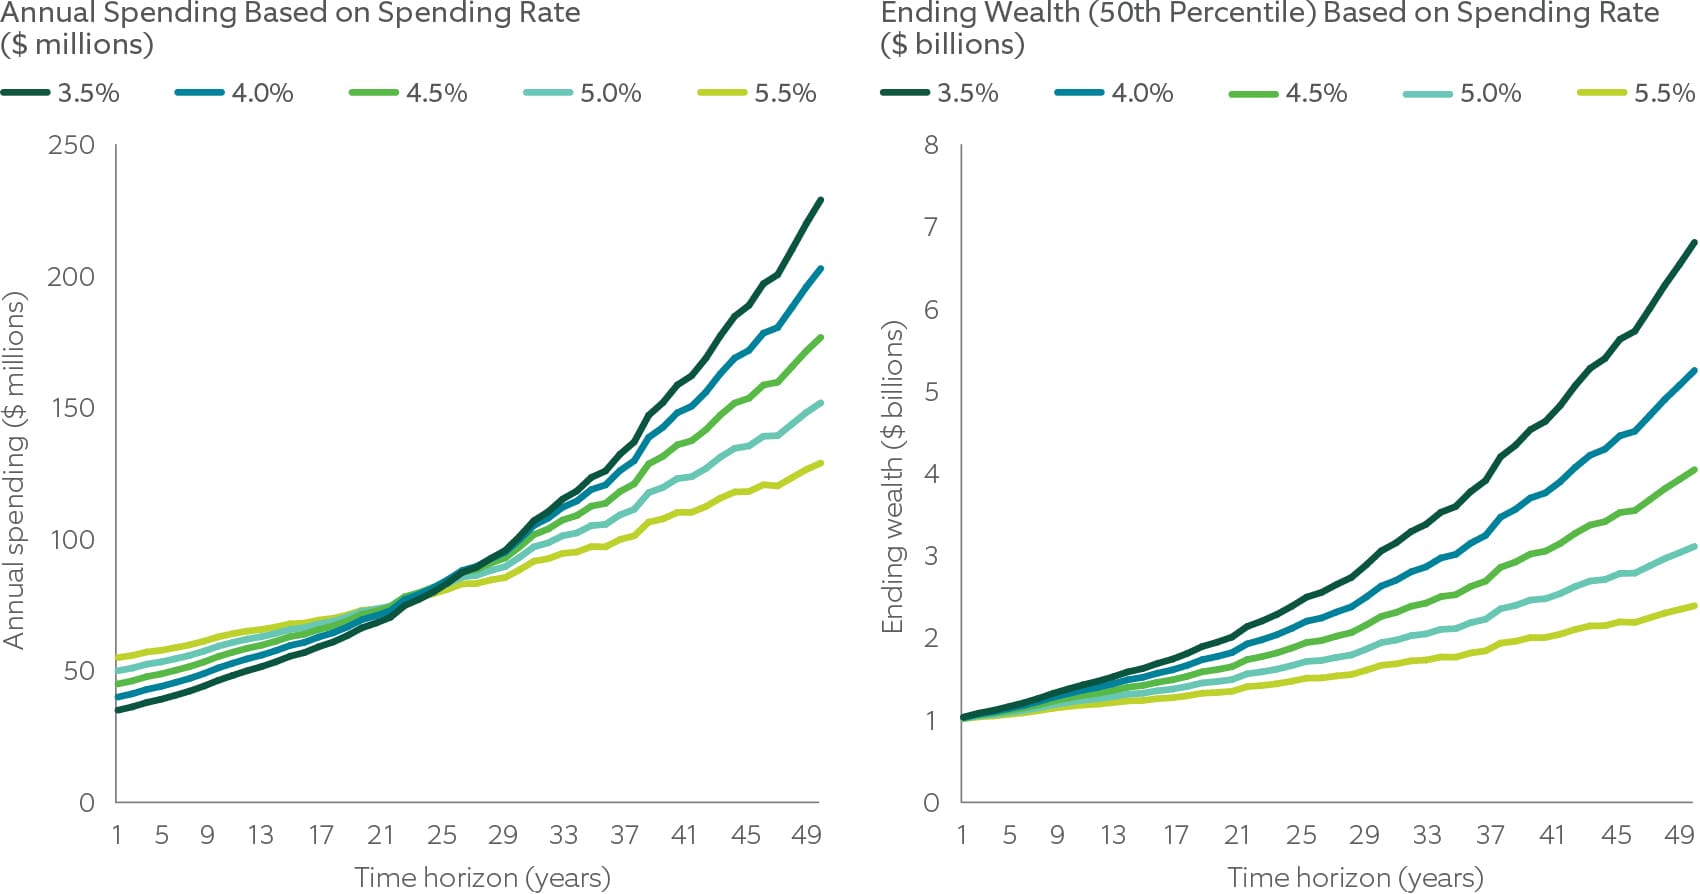 Annual Spending Based on Spending Rate and ending wealth based on spending rate